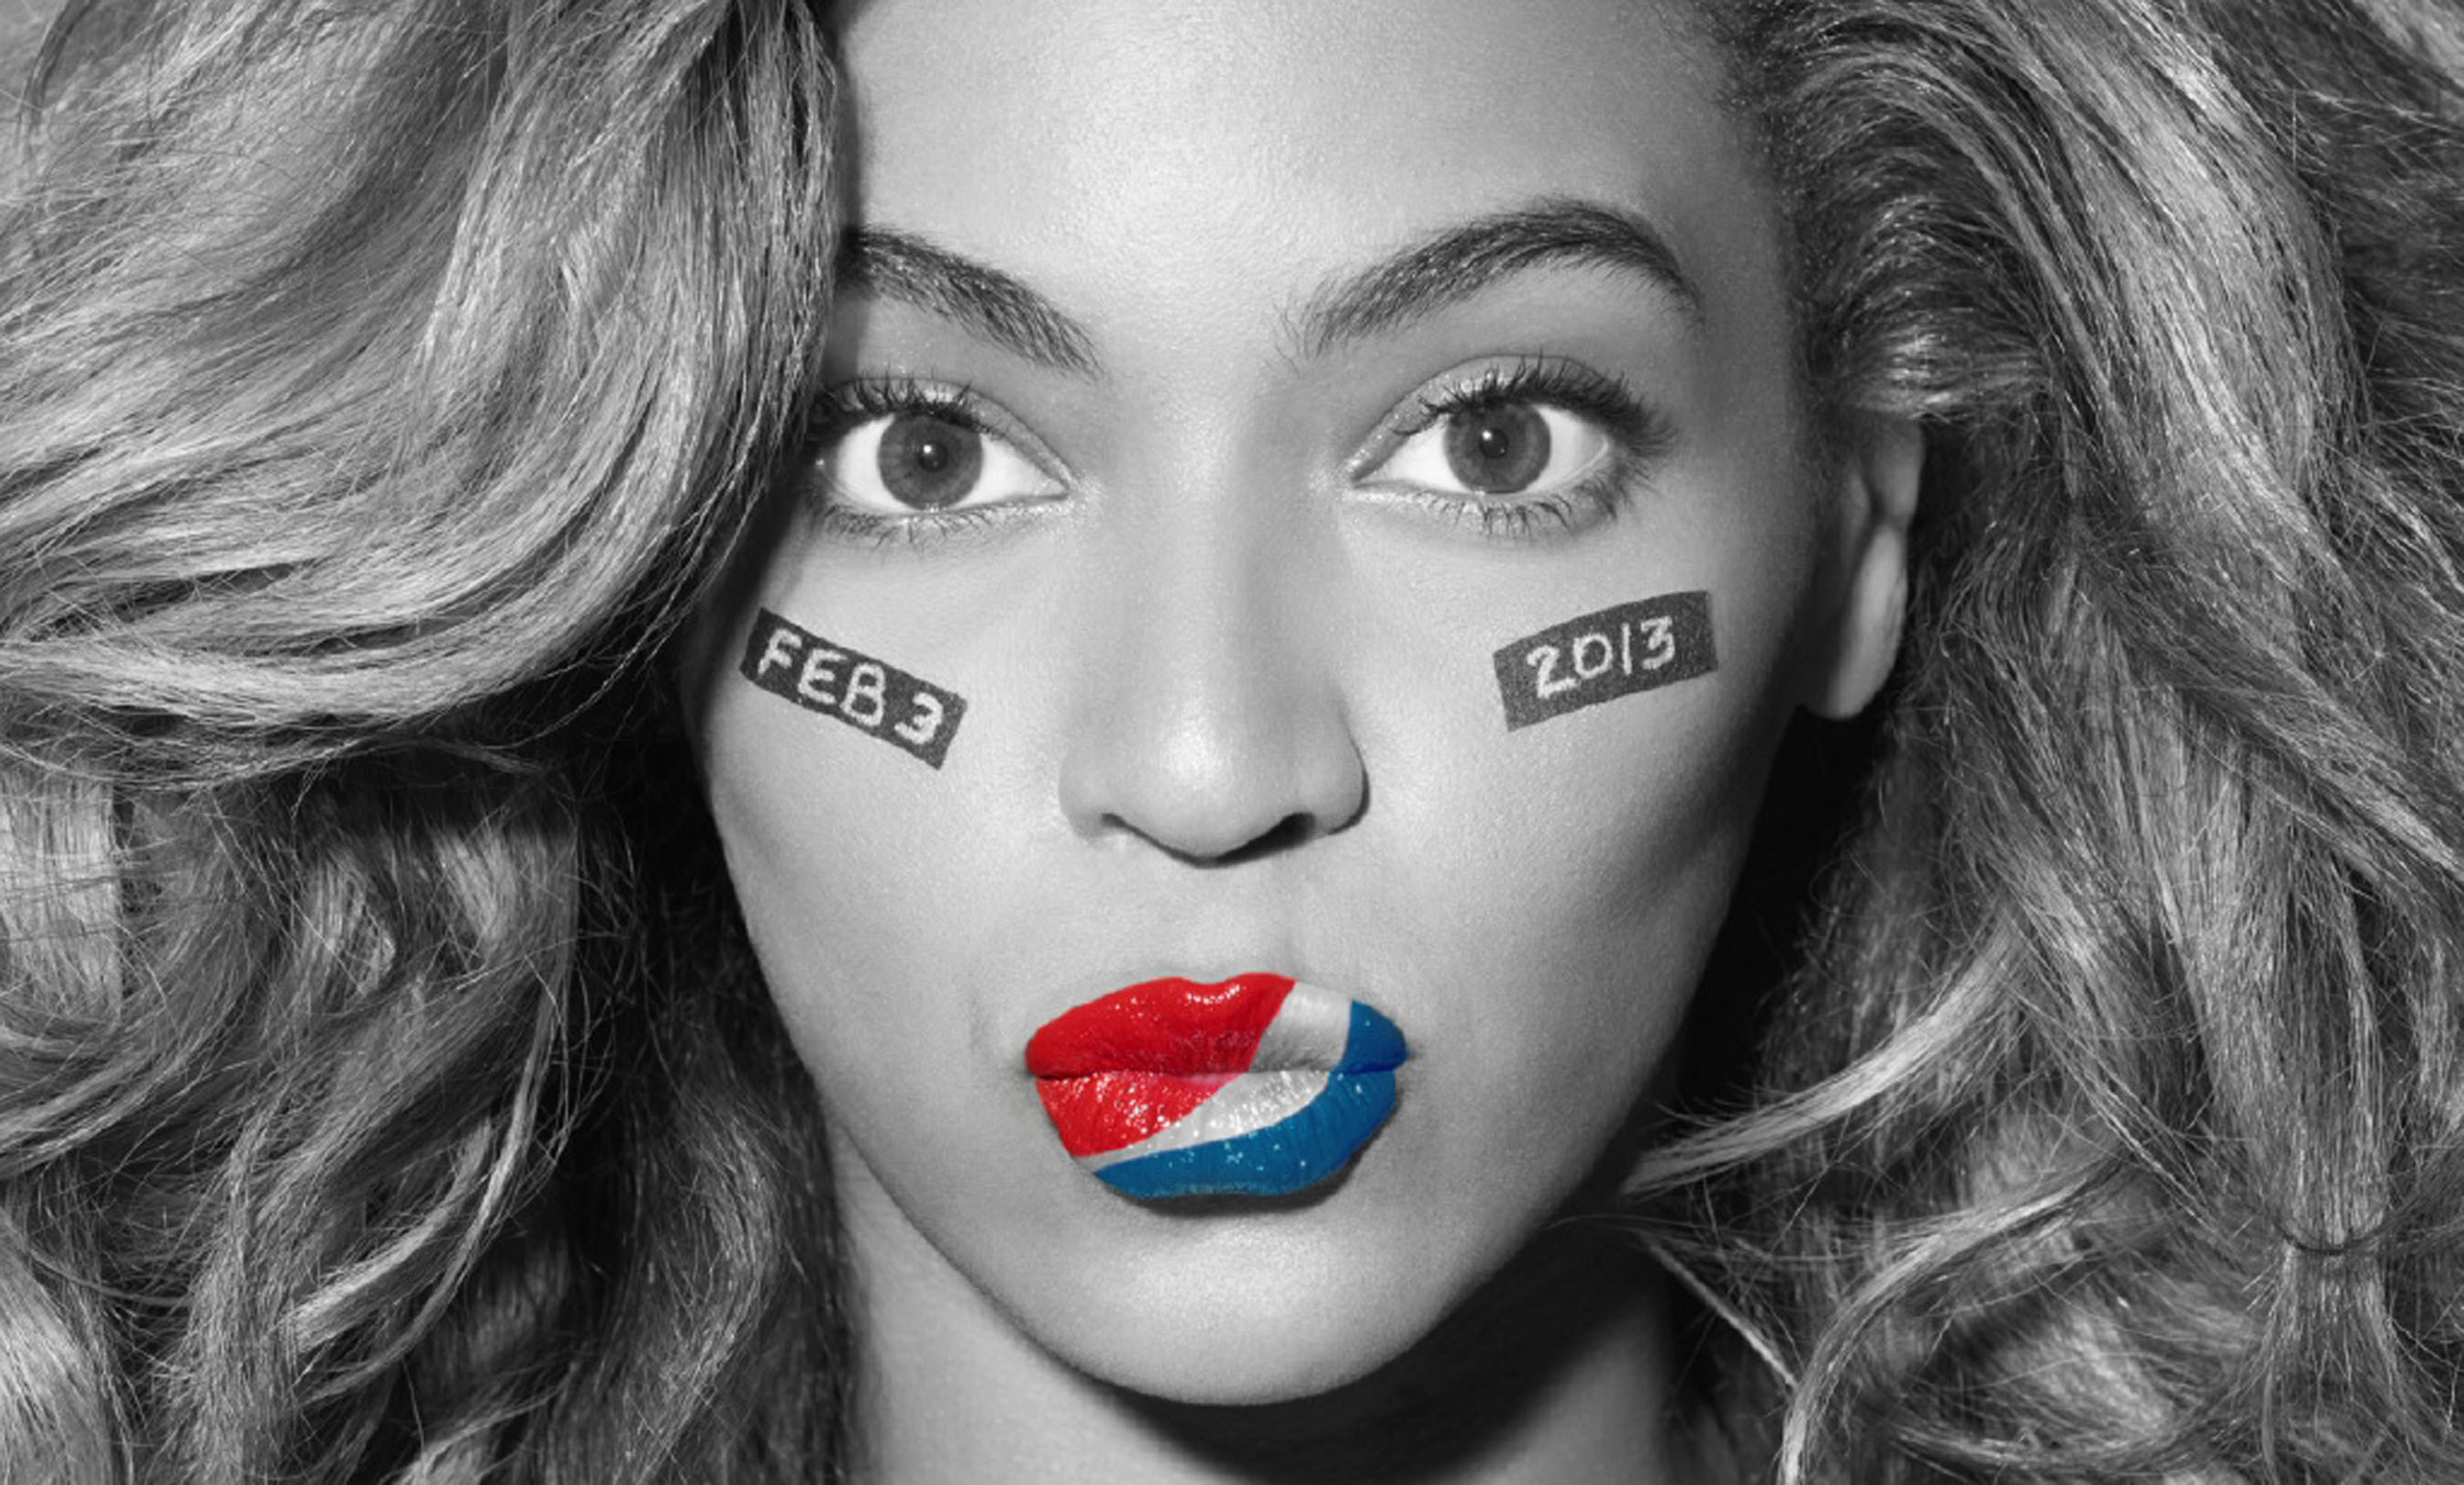 Pepsi and Beyonce invite fans to help kick-off the Pepsi Super Bowl XLVII Halftime Show. Fans are encouraged to submit photos for a chance to appear in an on-air introduction welcoming Beyonce to the stage for the Pepsi Super Bowl XLVII Halftime Show. Pepsi's partnership with the NFL and Beyonce is an extension of the brand's "Live For Now" campaign. (PRNewsFoto/PepsiCo)